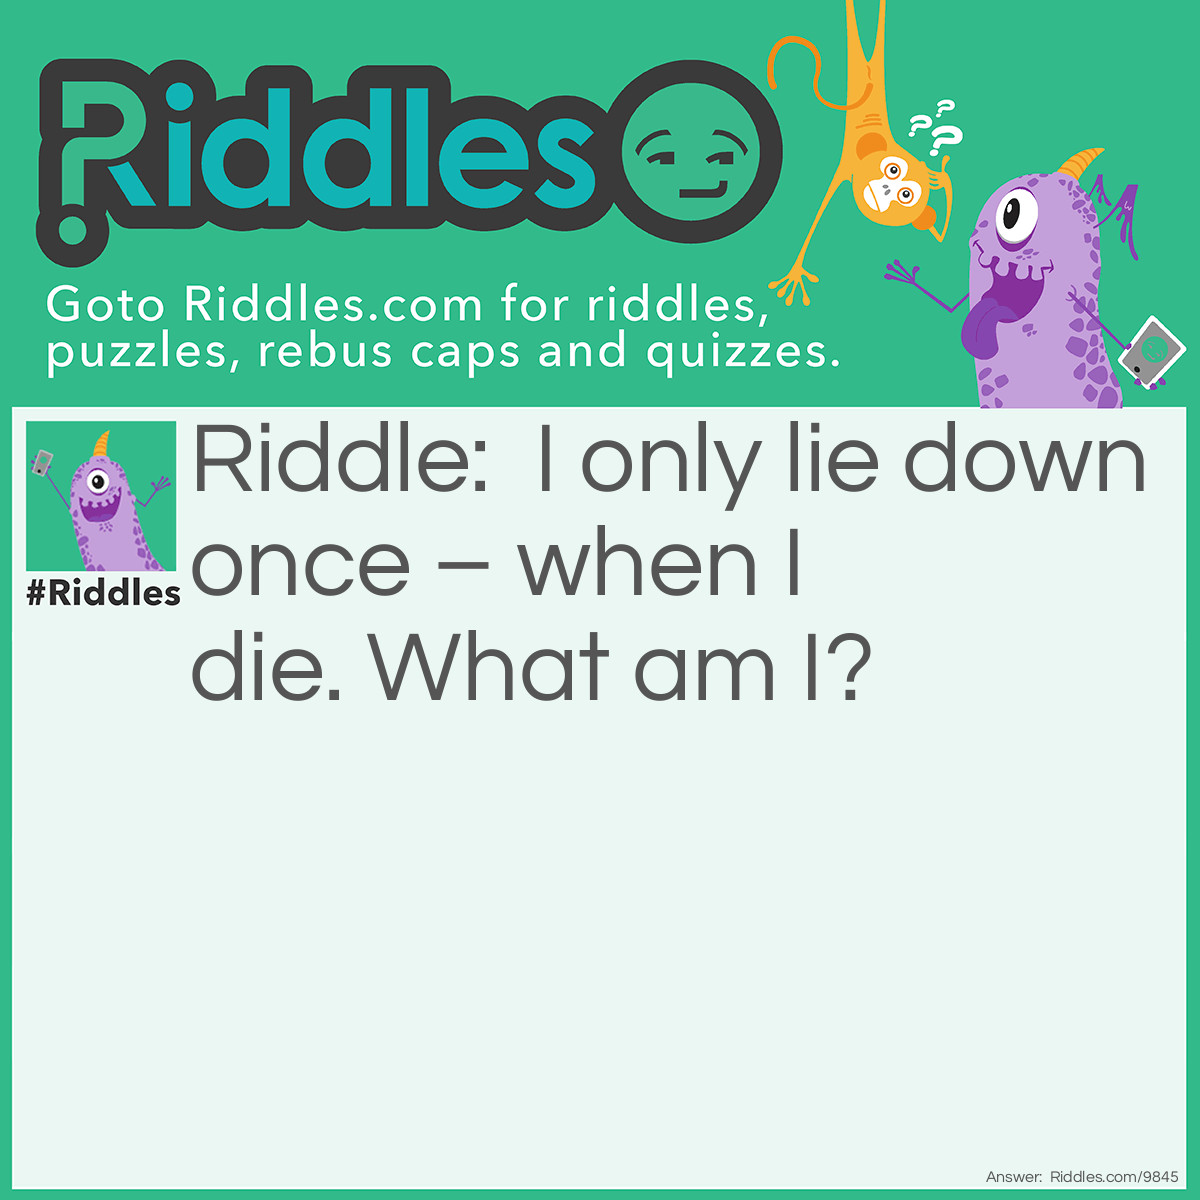 Riddle: I only lie down once - when I die. What am I? Answer: A tree.